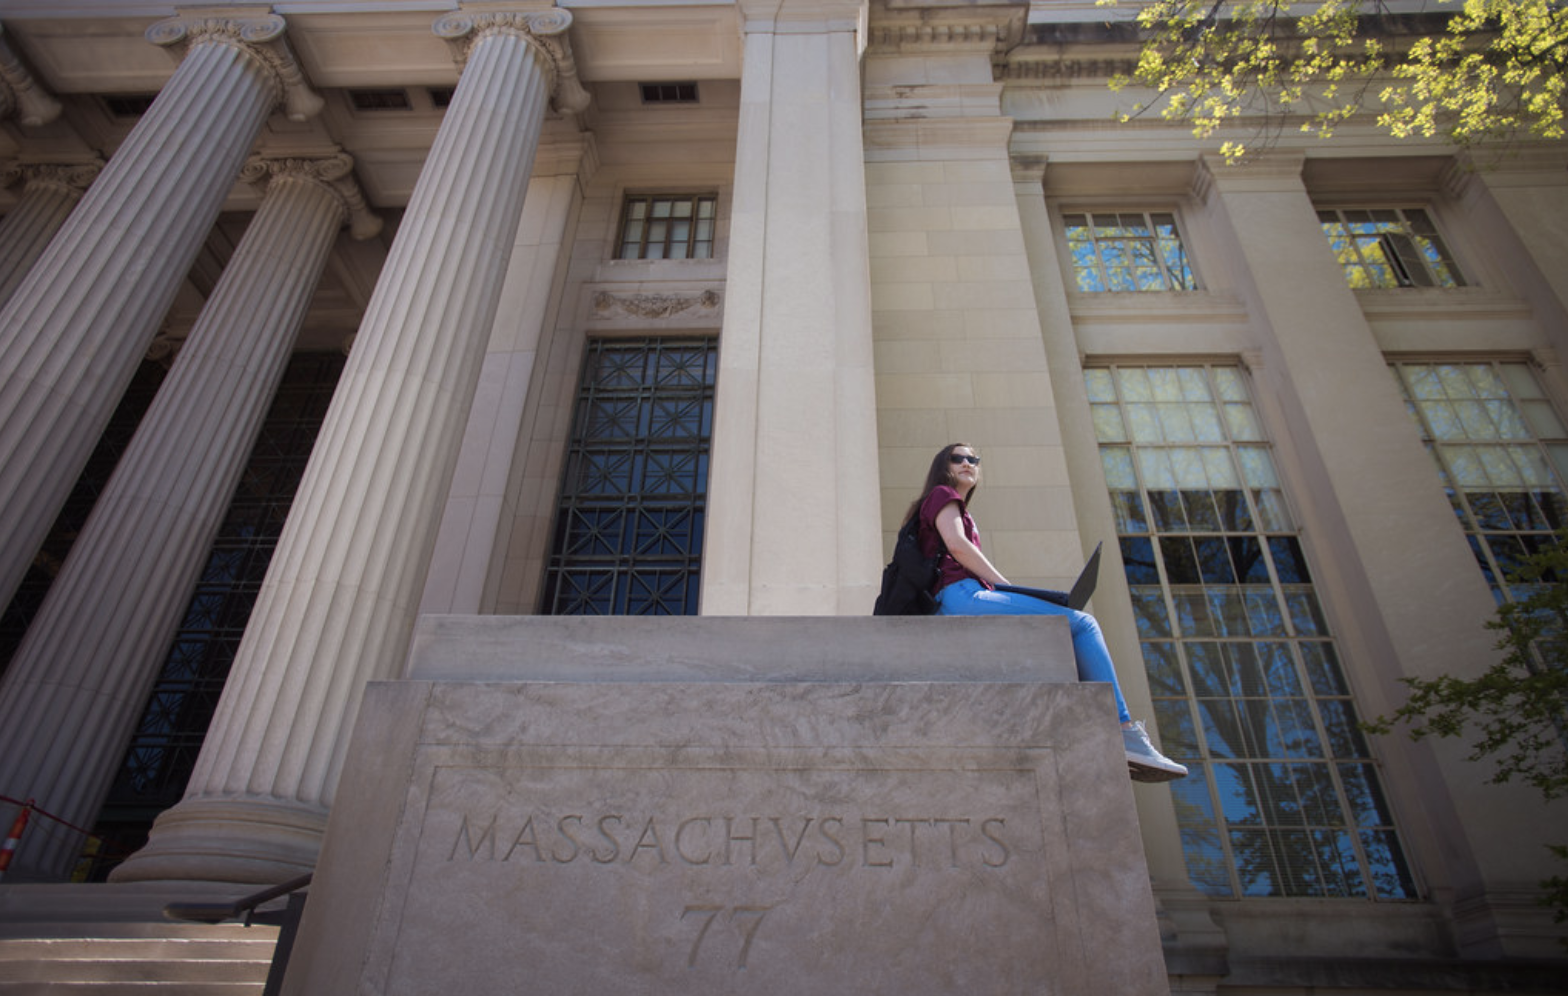 MIT community in 2020: A year in review, MIT News